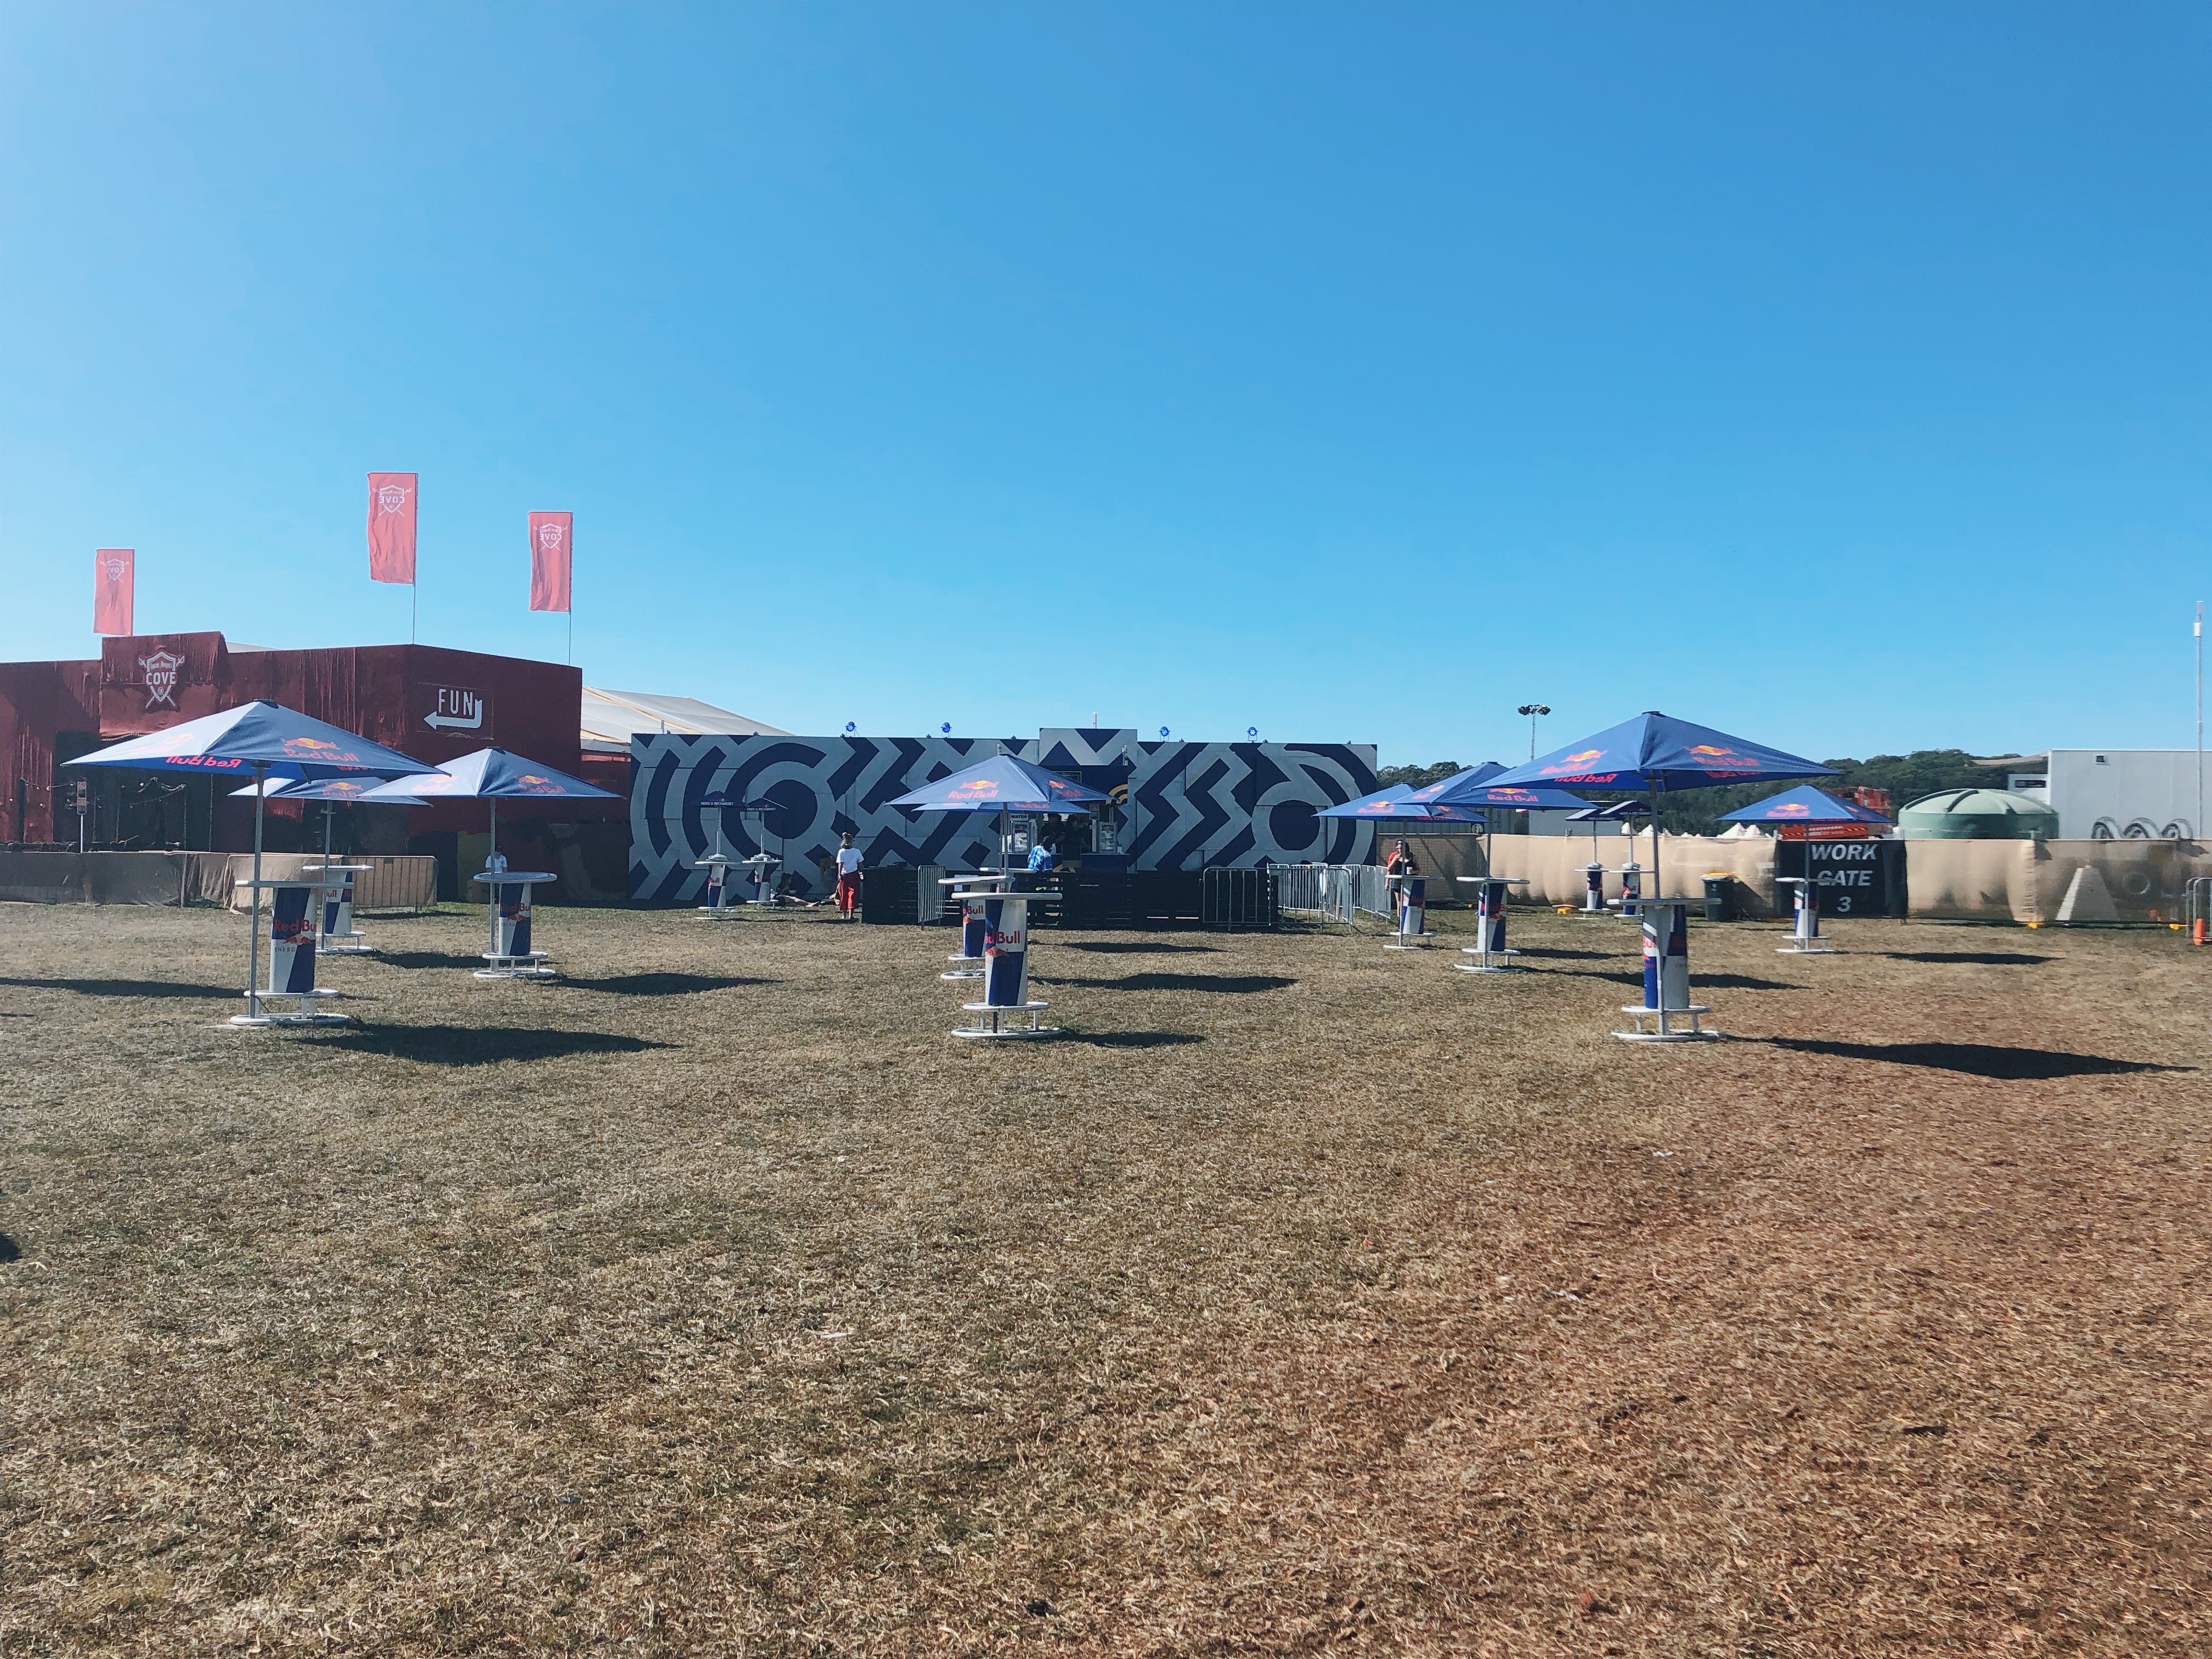 “What happened to Red Bull?” We review the best (and worst) brand activations at Splendour